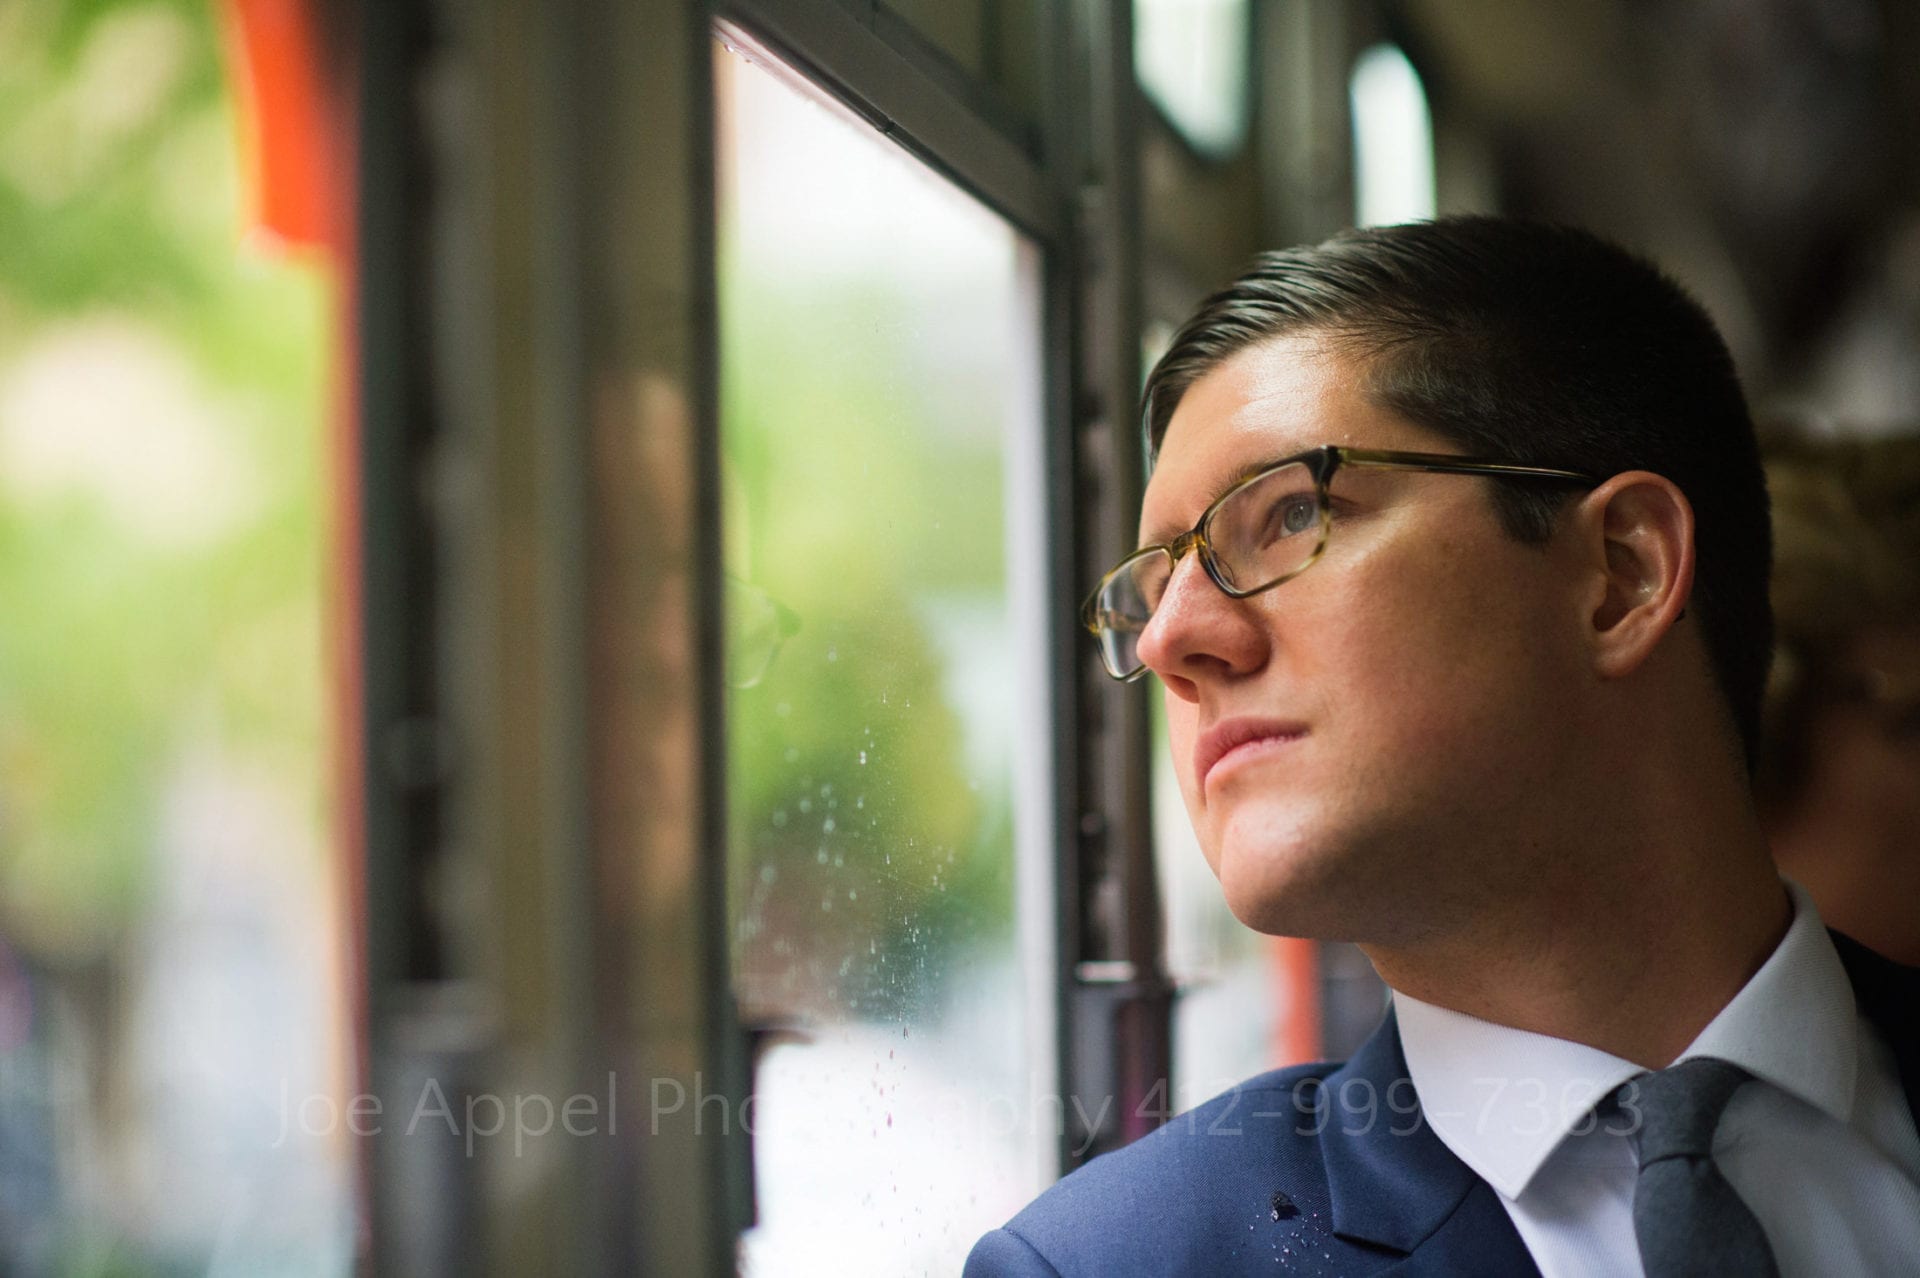 A young man wearing tortoise shell glasses looks out of a rain speckled bus window. There is a raindrop on the shoulder of his blue suit.